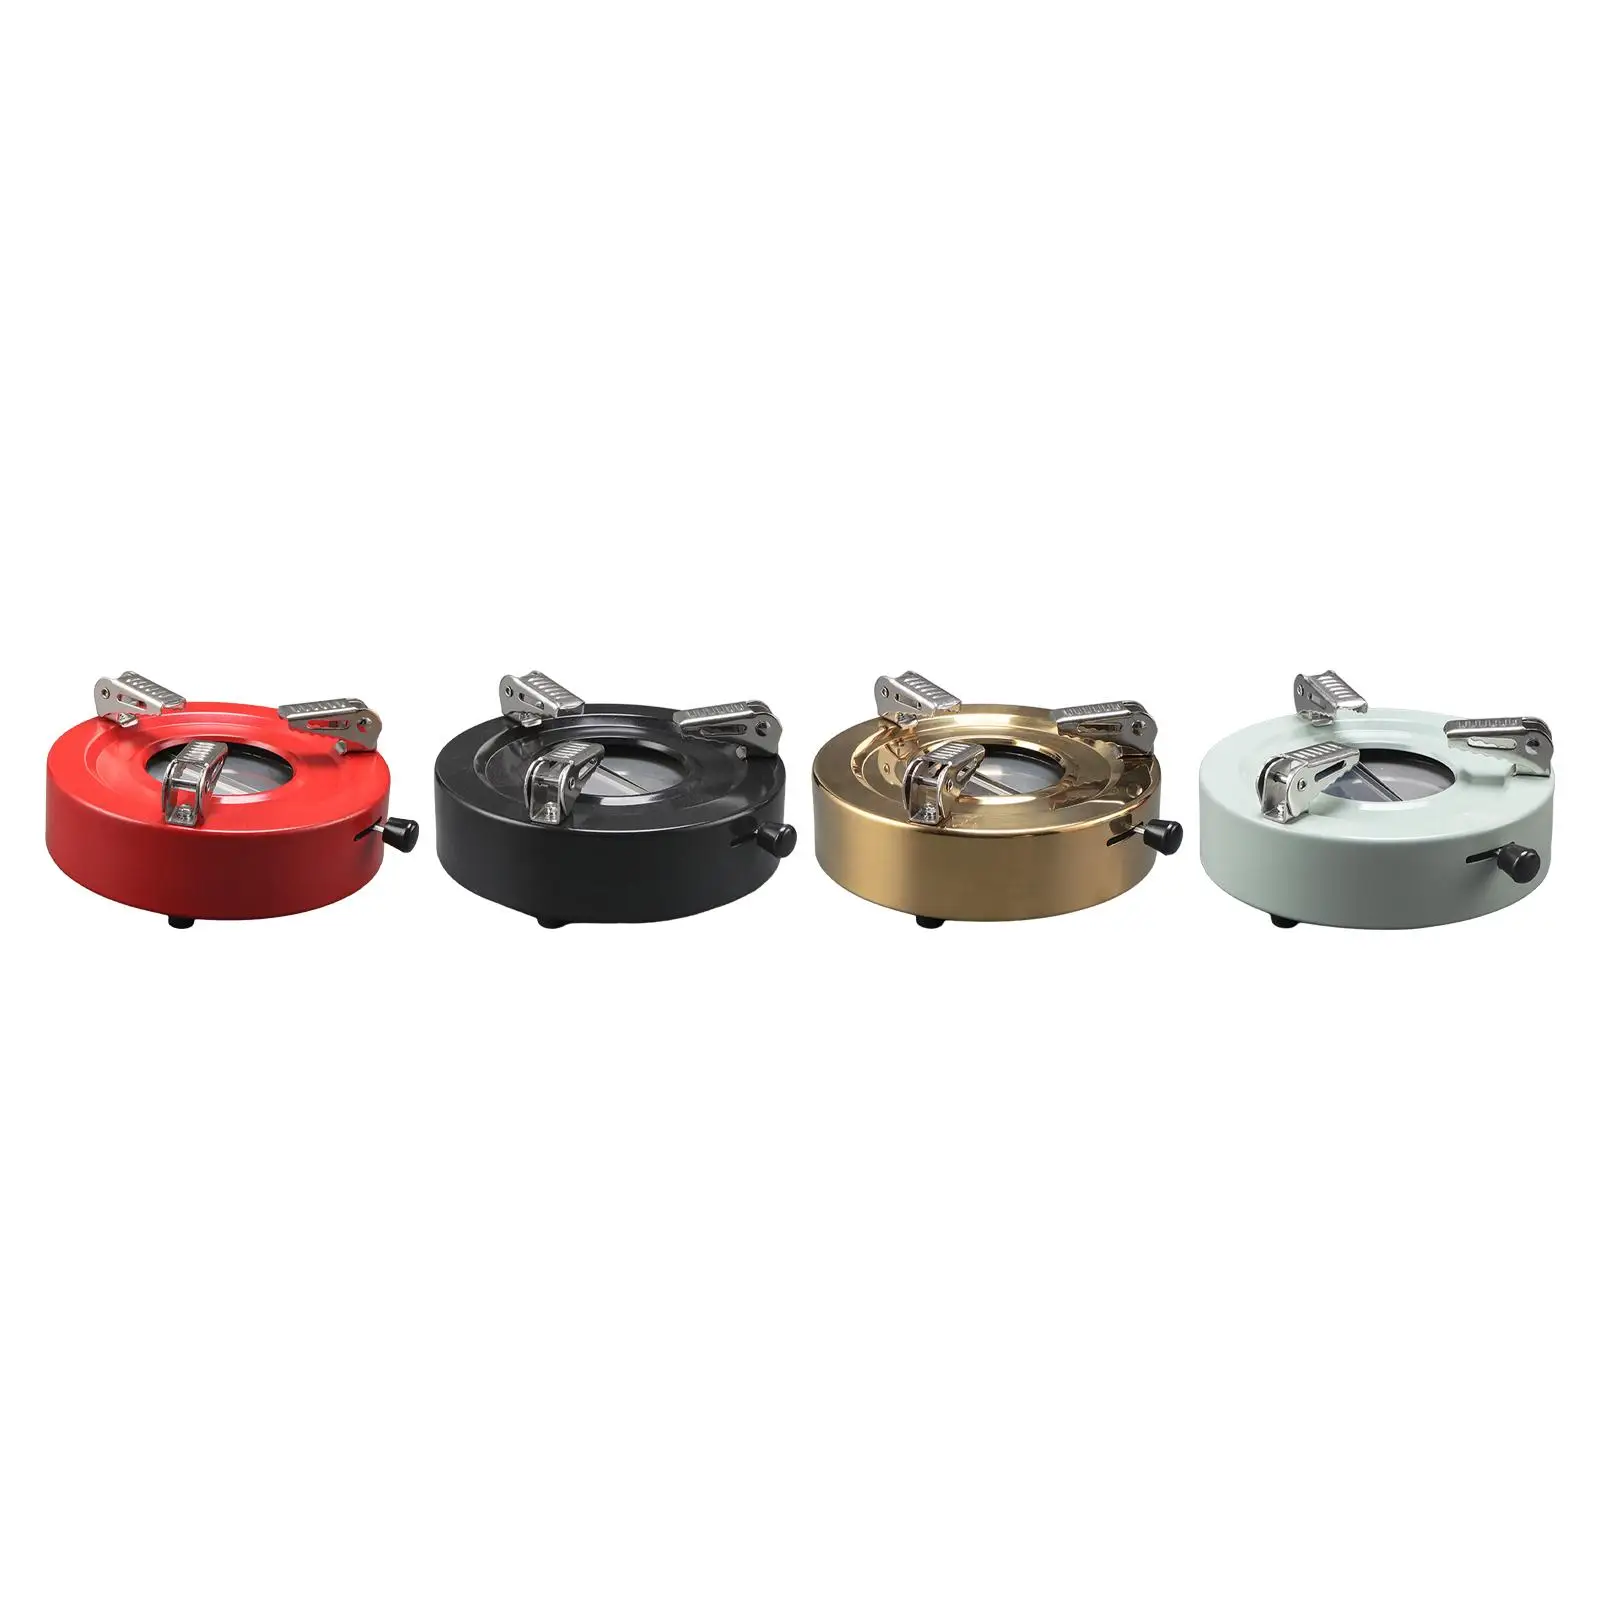 Alcohol Stove Durable Compact Camping Stove for Household Restaurant Outdoor